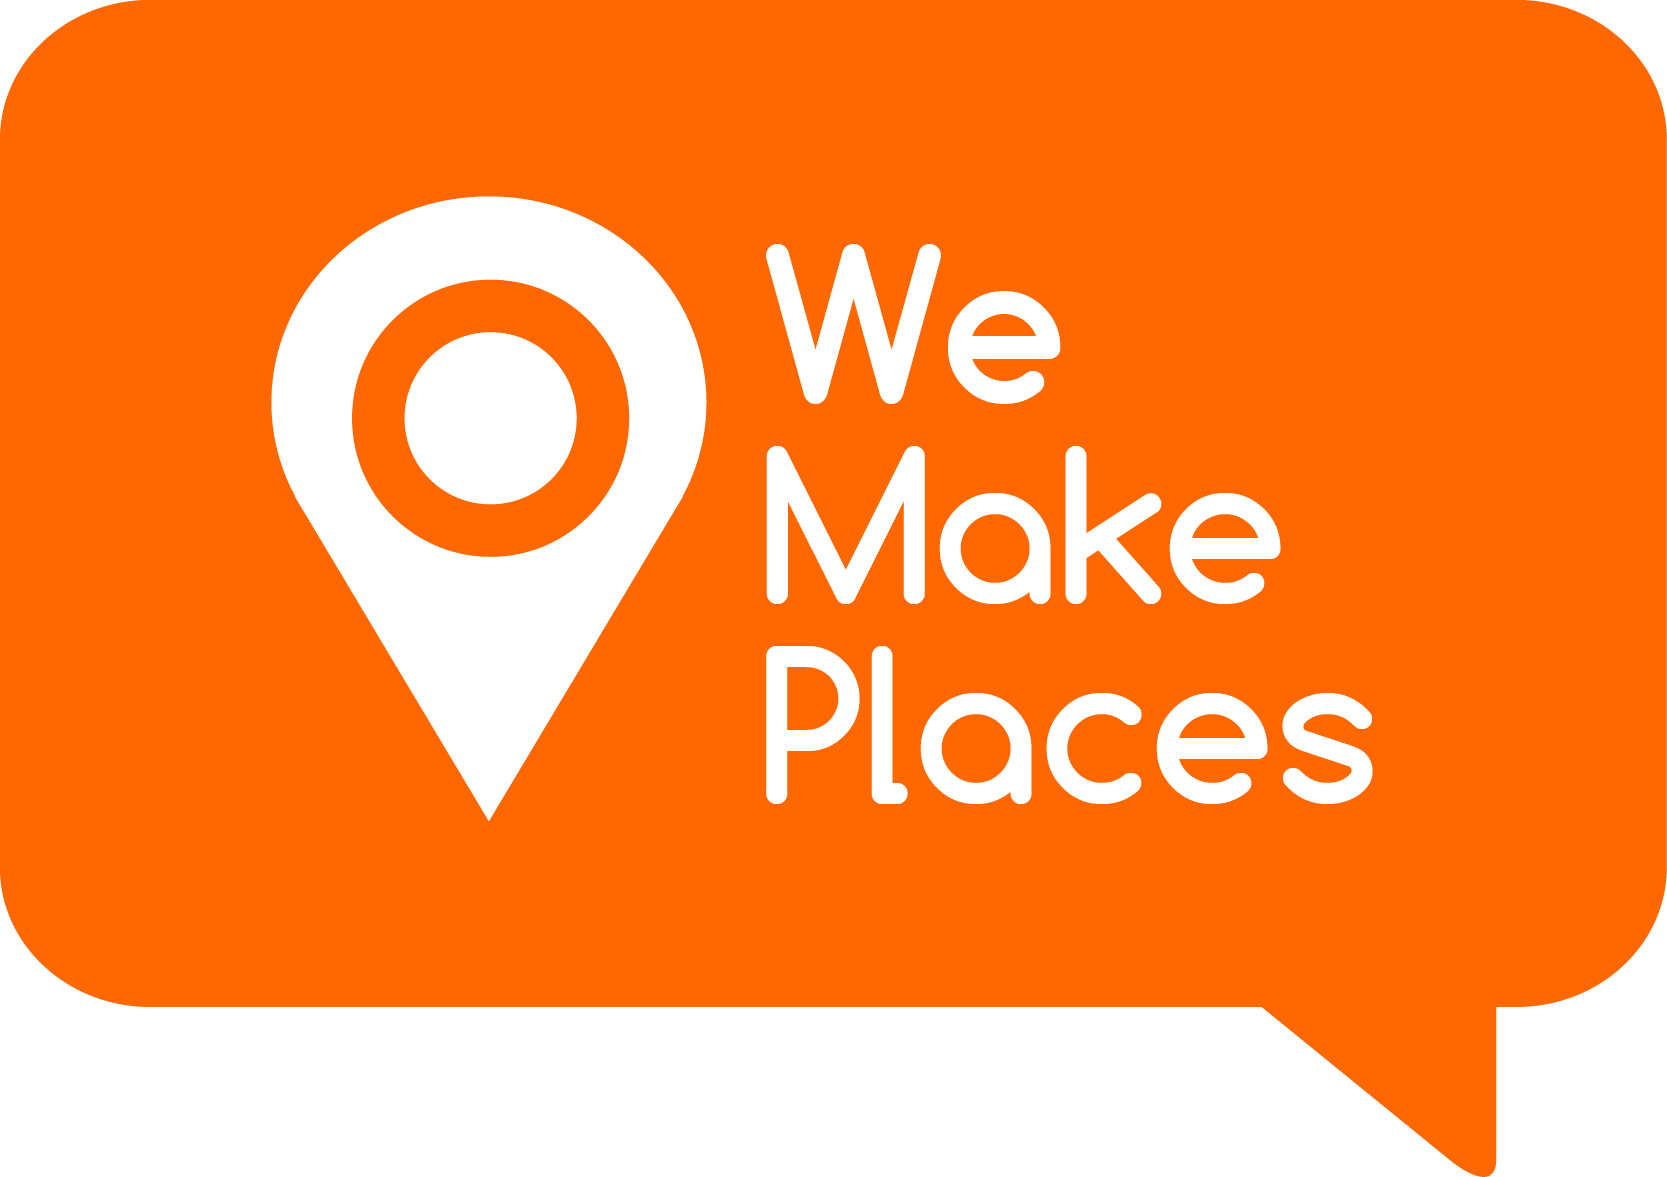 Places Logo - Peoples Palace Projects Archives We Make Places Logo Image - Free ...